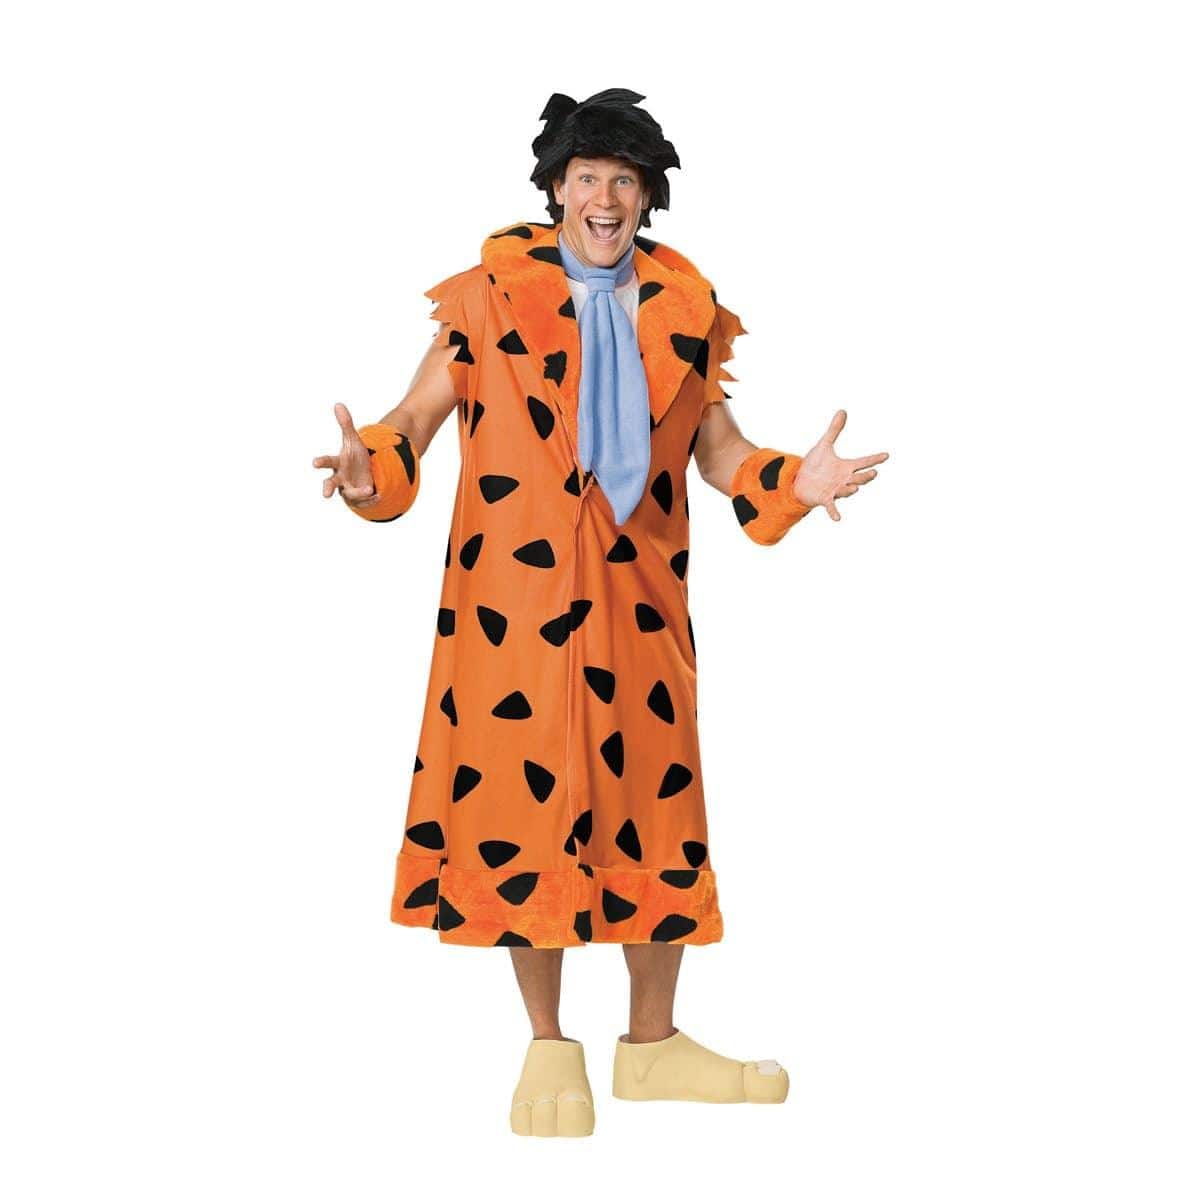 Buy Costumes Fred Flintstone Costume for Adults, The Flintstones sold at Party Expert